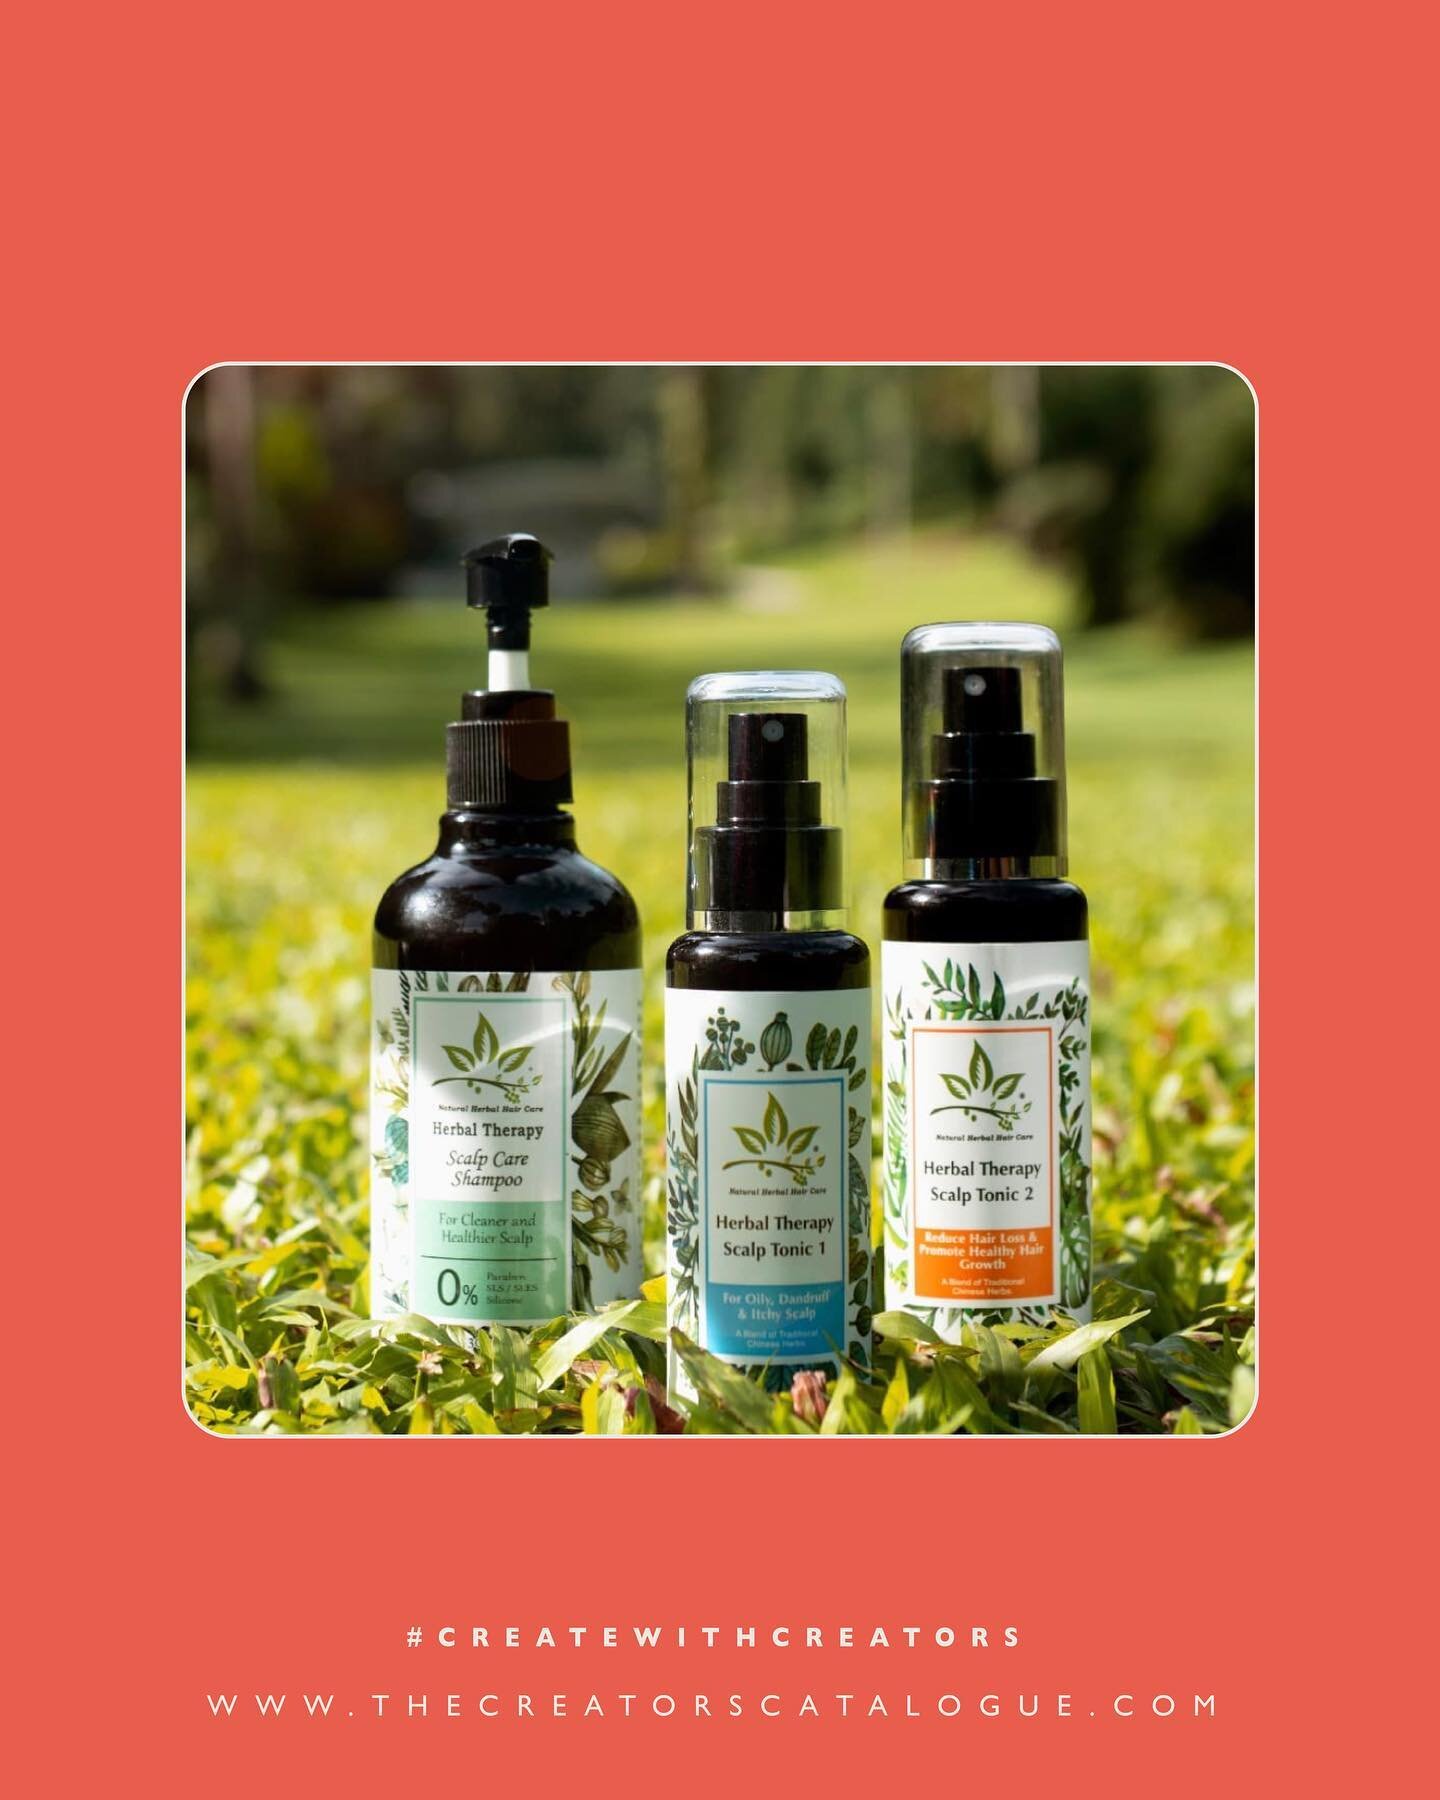 Scope of work: Social media management, product photography 
Company/Brand: Natural Herbal Hair Care

#createwithcreators

While social media may be a tool to connect with your followers, it is essential to capture a shot that attracts your followers